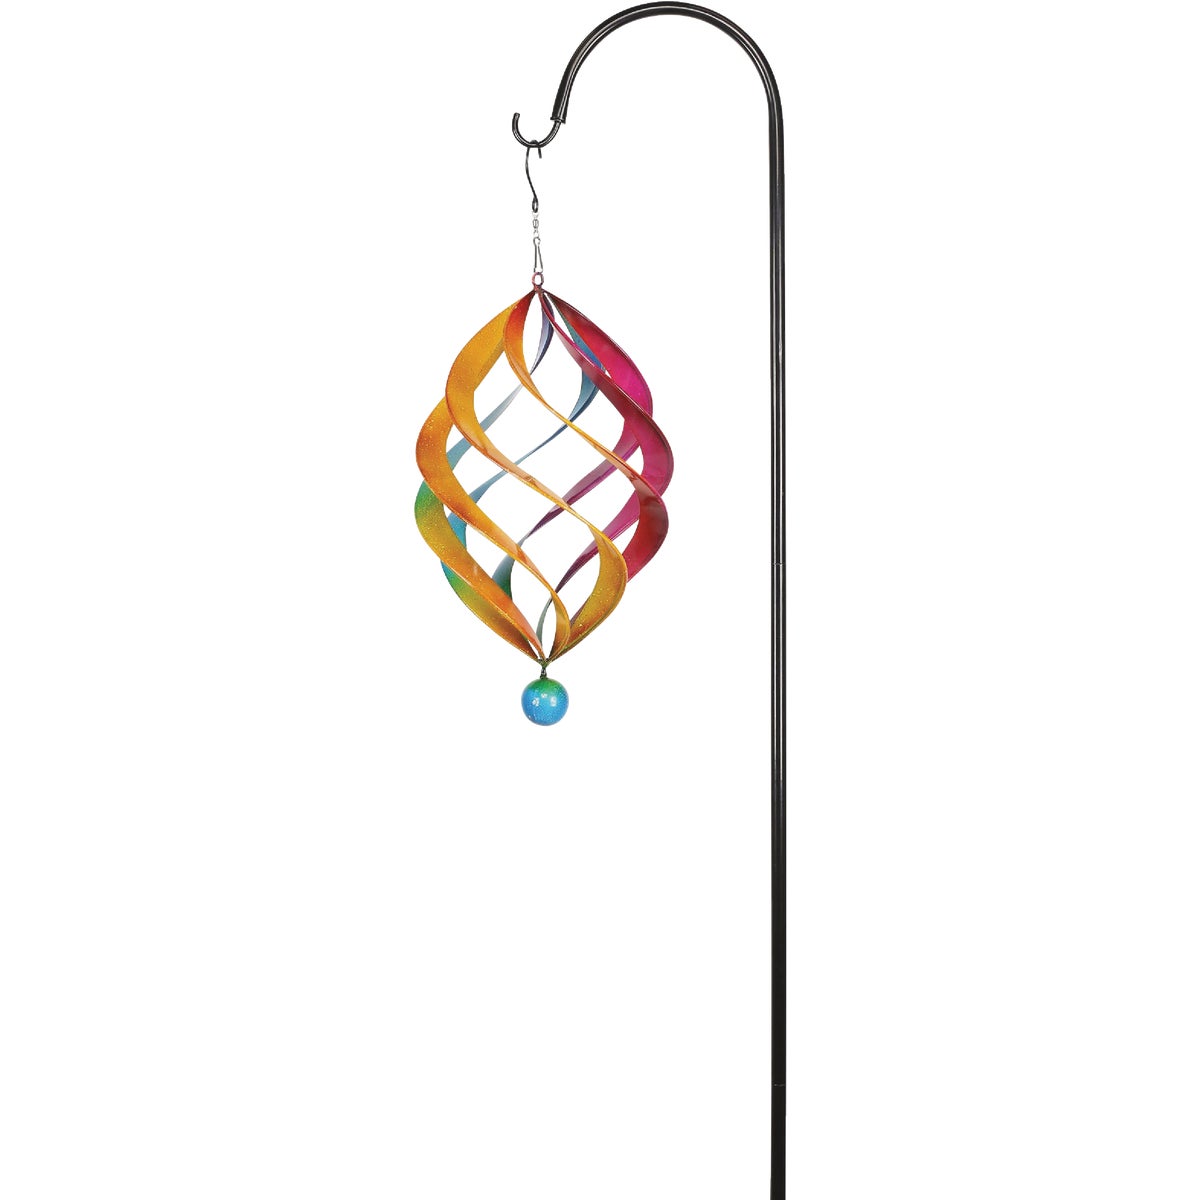 Alpine 19 In. H. Multi-Color Iron Wind Spinner with Shepherd's Hook